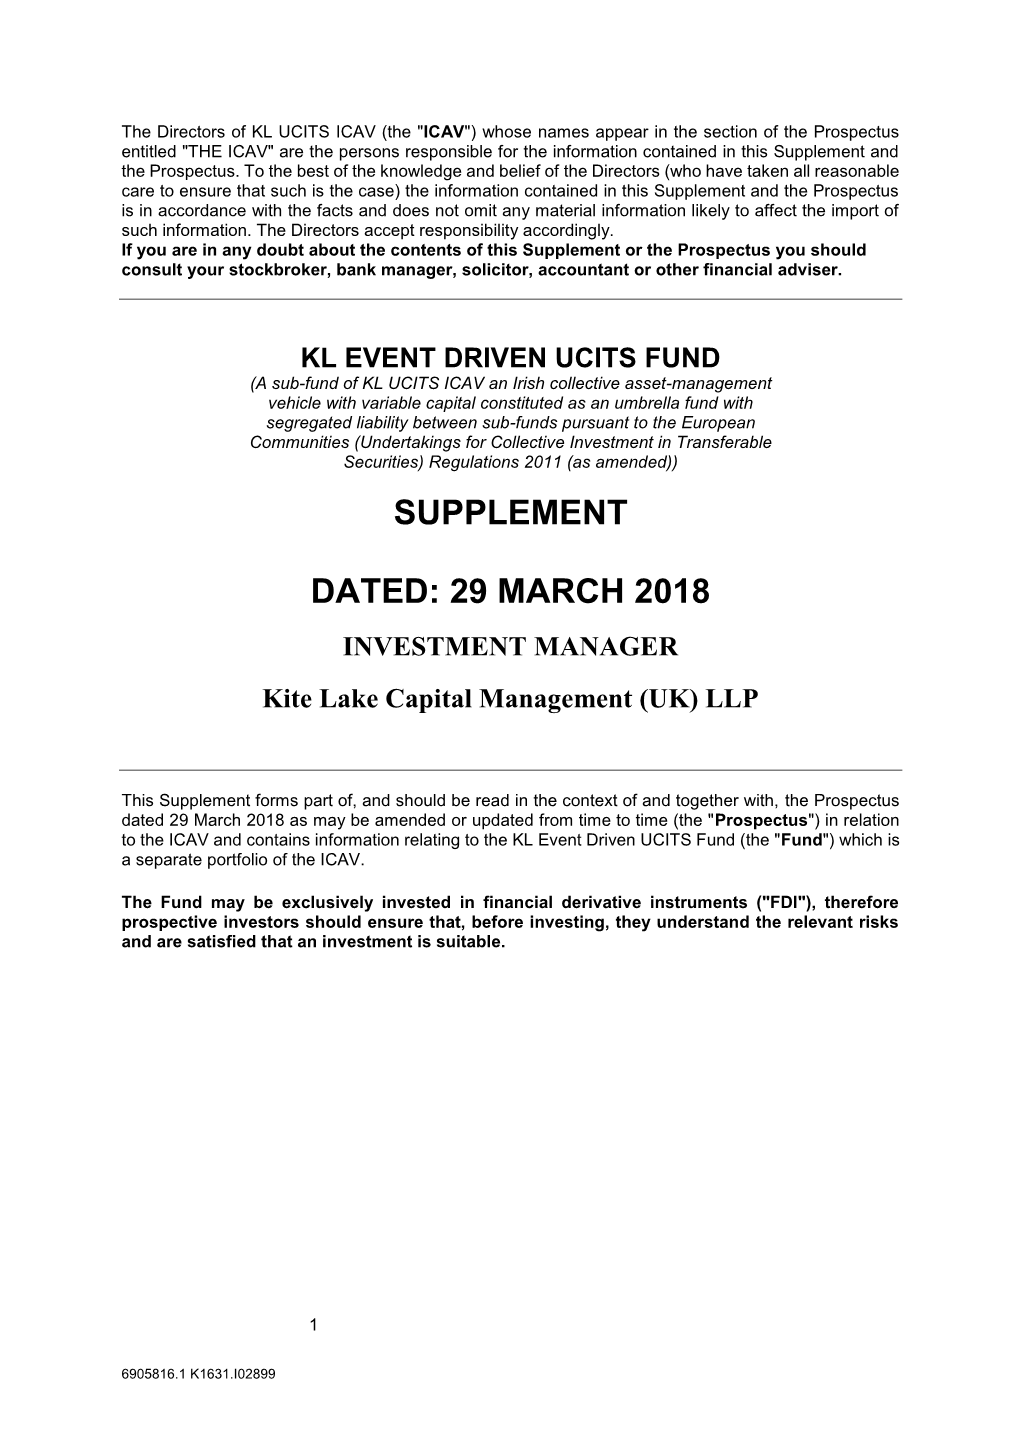 KL Event Driven UCITS Fund